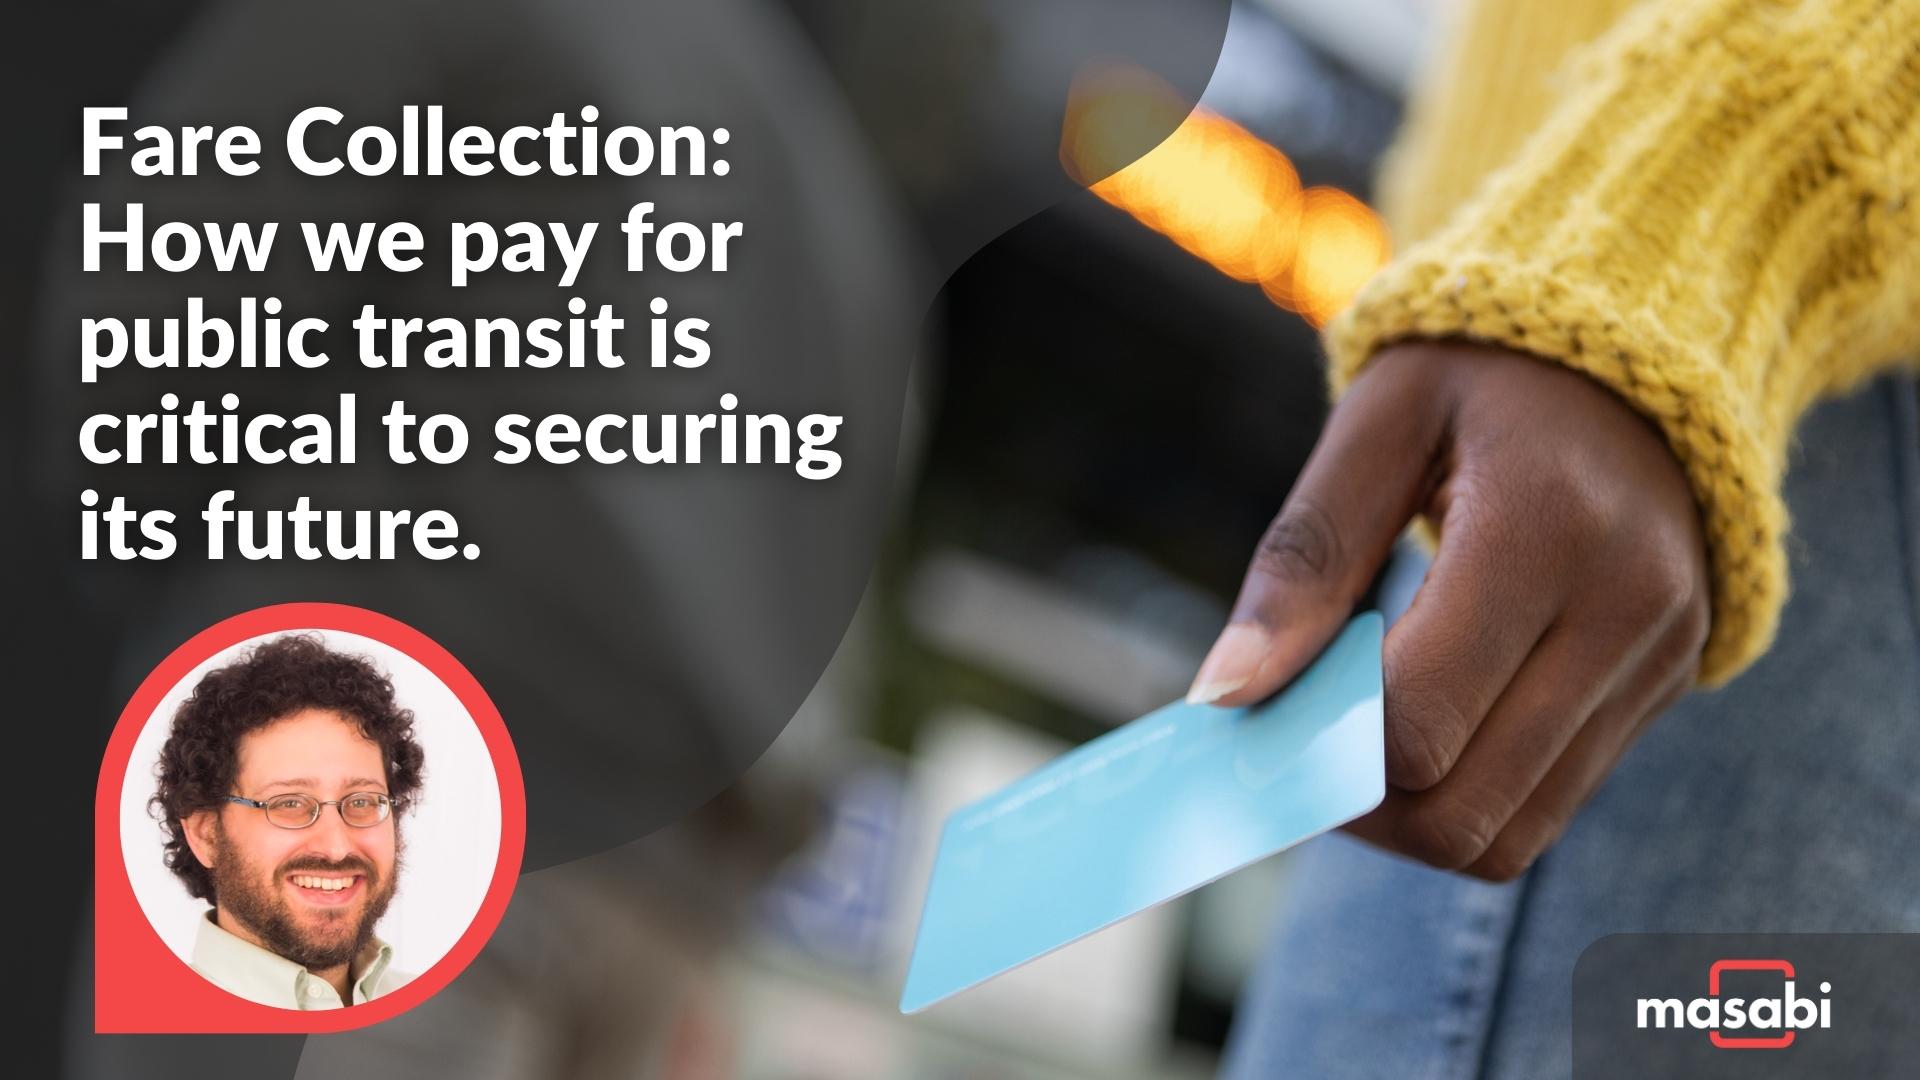 Fare Collection How we pay for public transit is critical to securing its future (1)